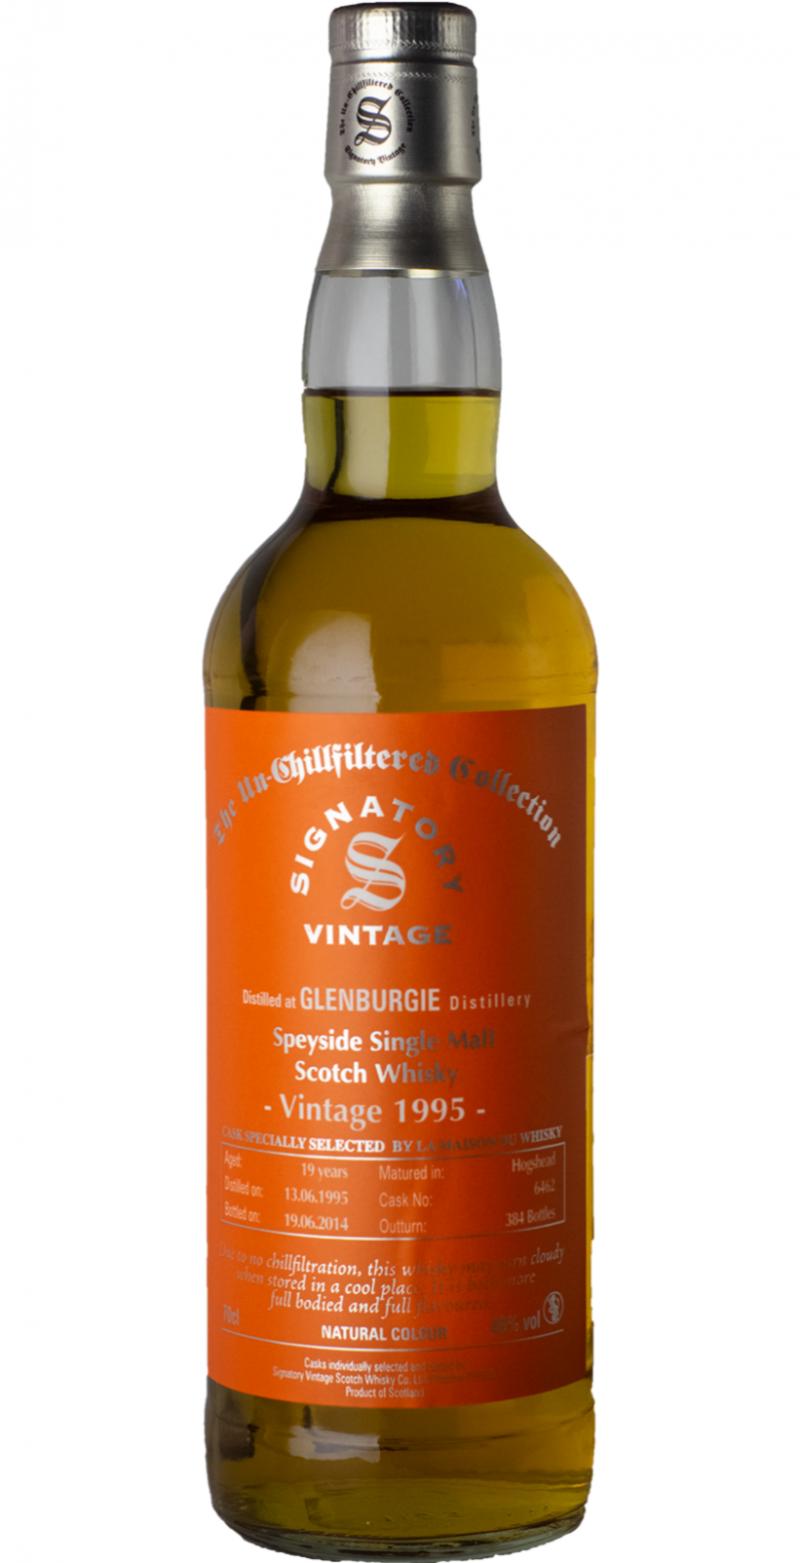 Glenburgie 1995 SV The Un-Chillfiltered Collection #6462 LMDW 46% 700ml